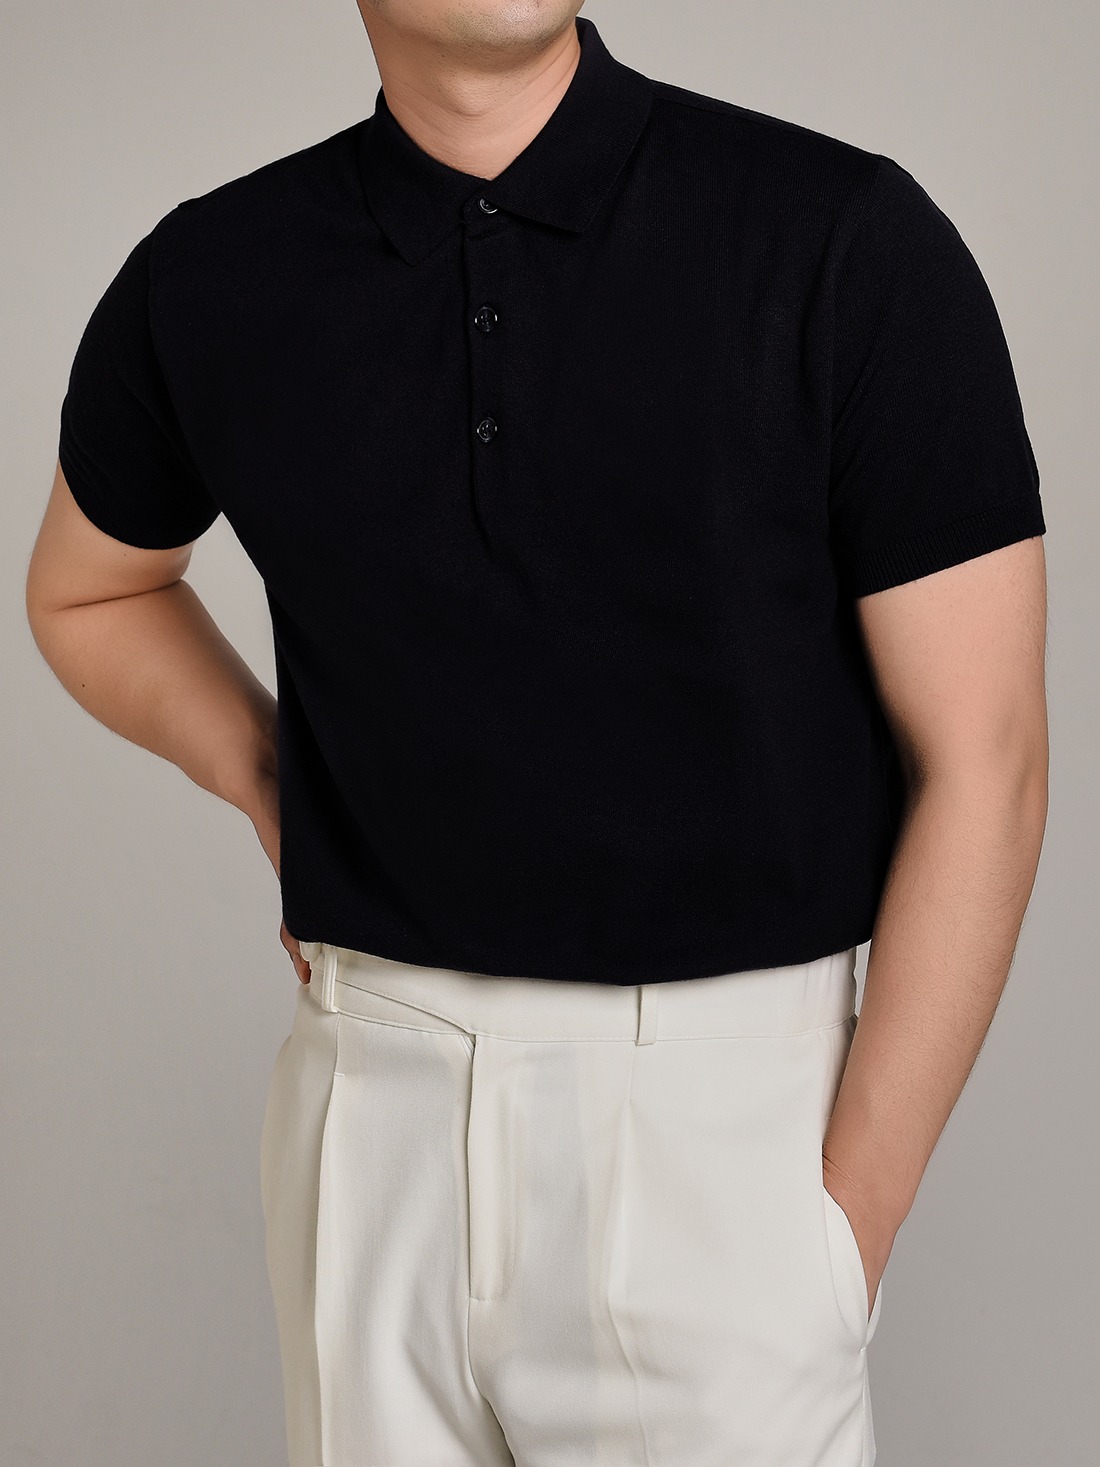 soft touch solid polo knit (black)